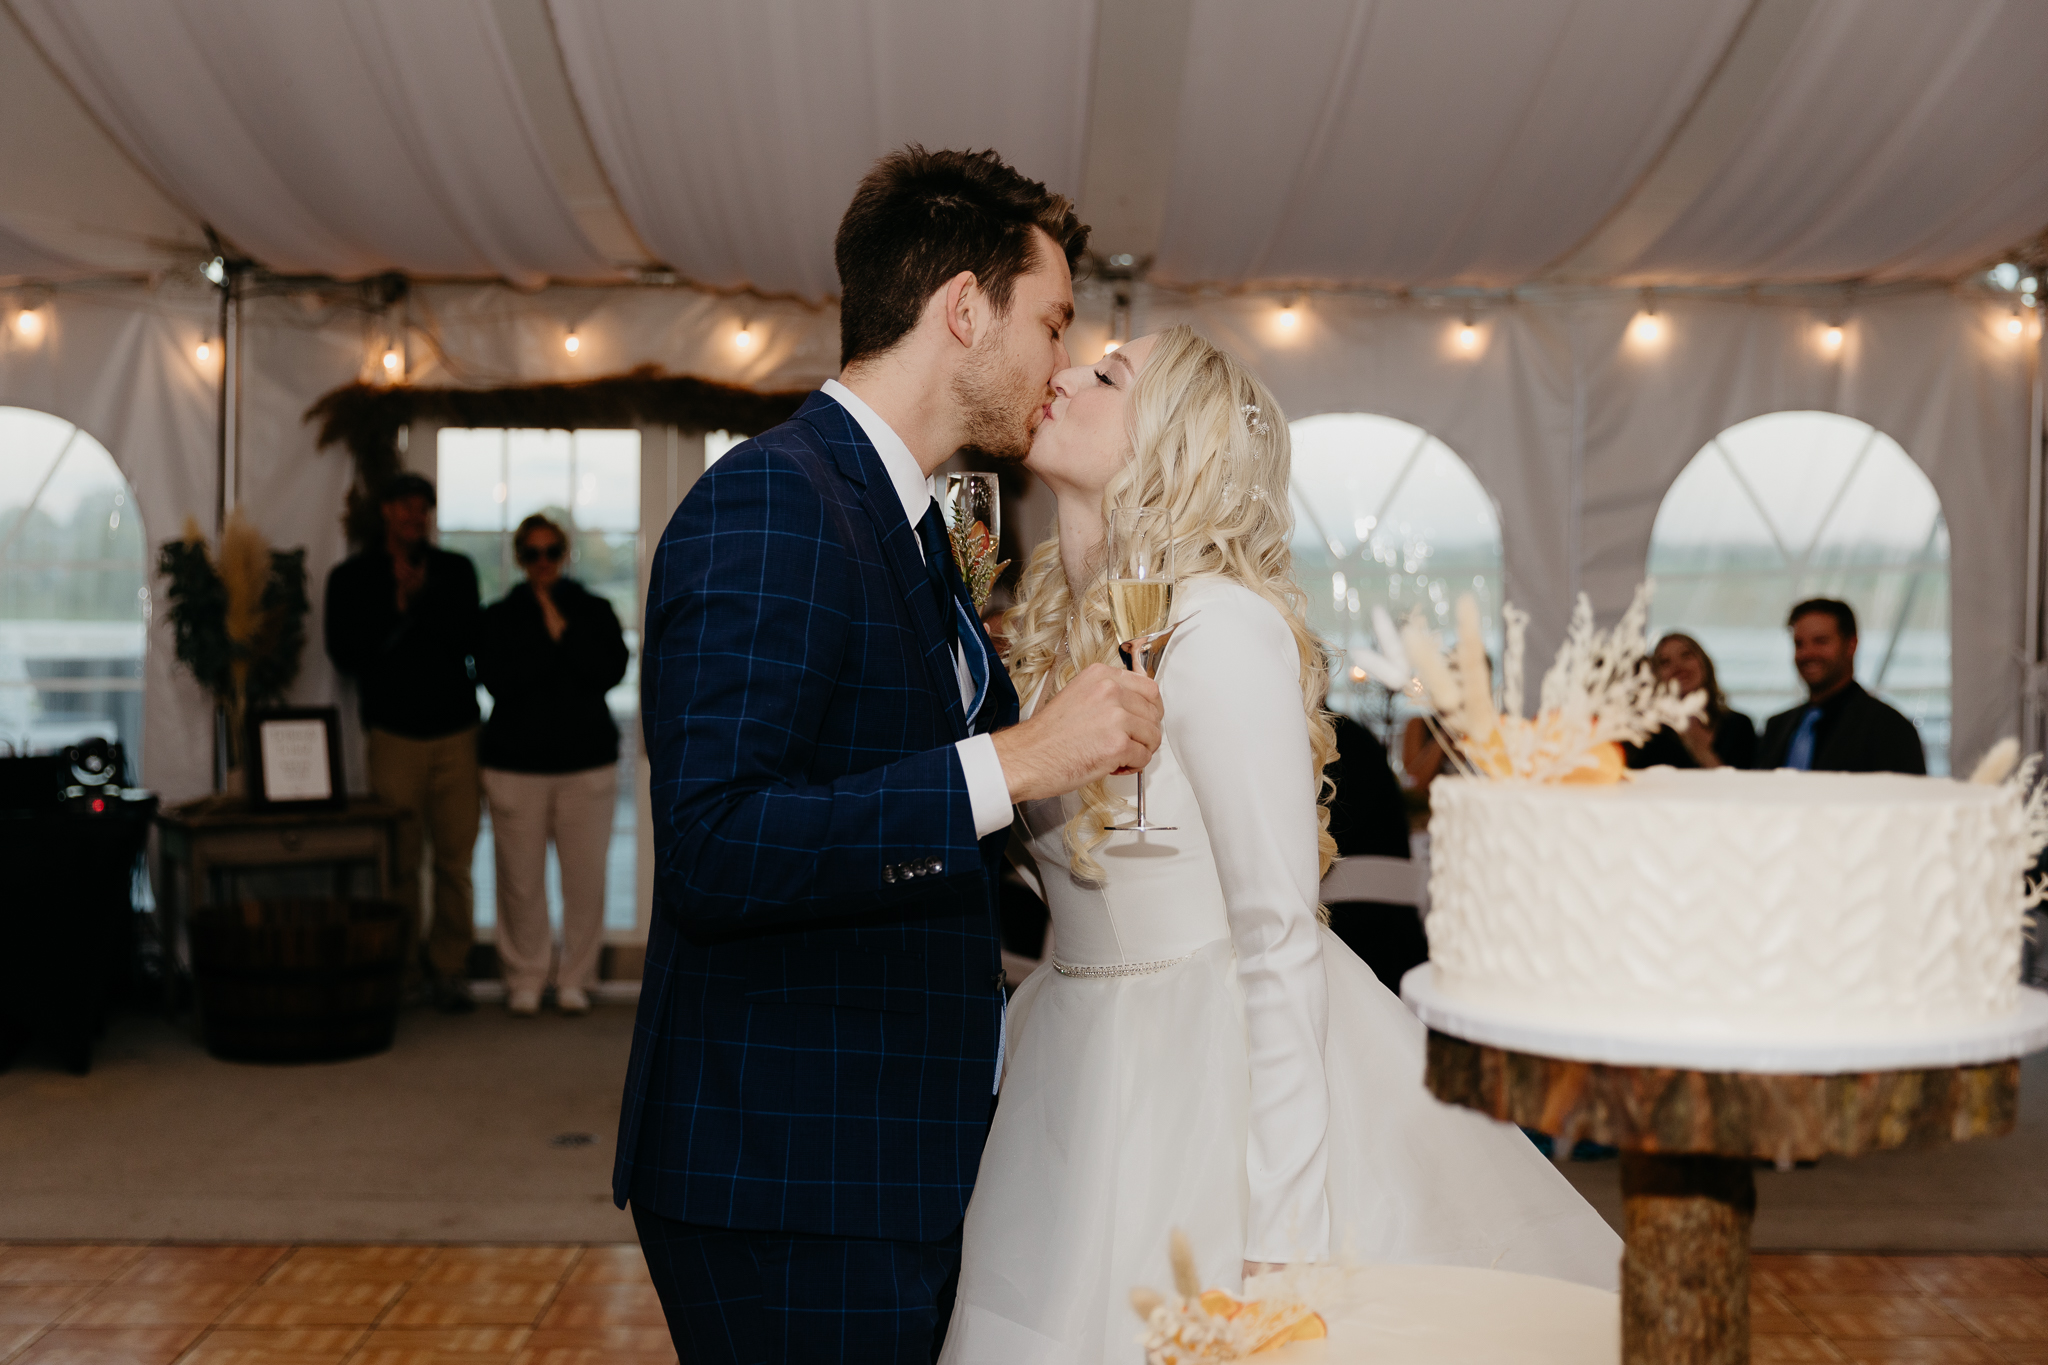 Bride and groom toast champagne and kiss in a white tent during their October wedding reception